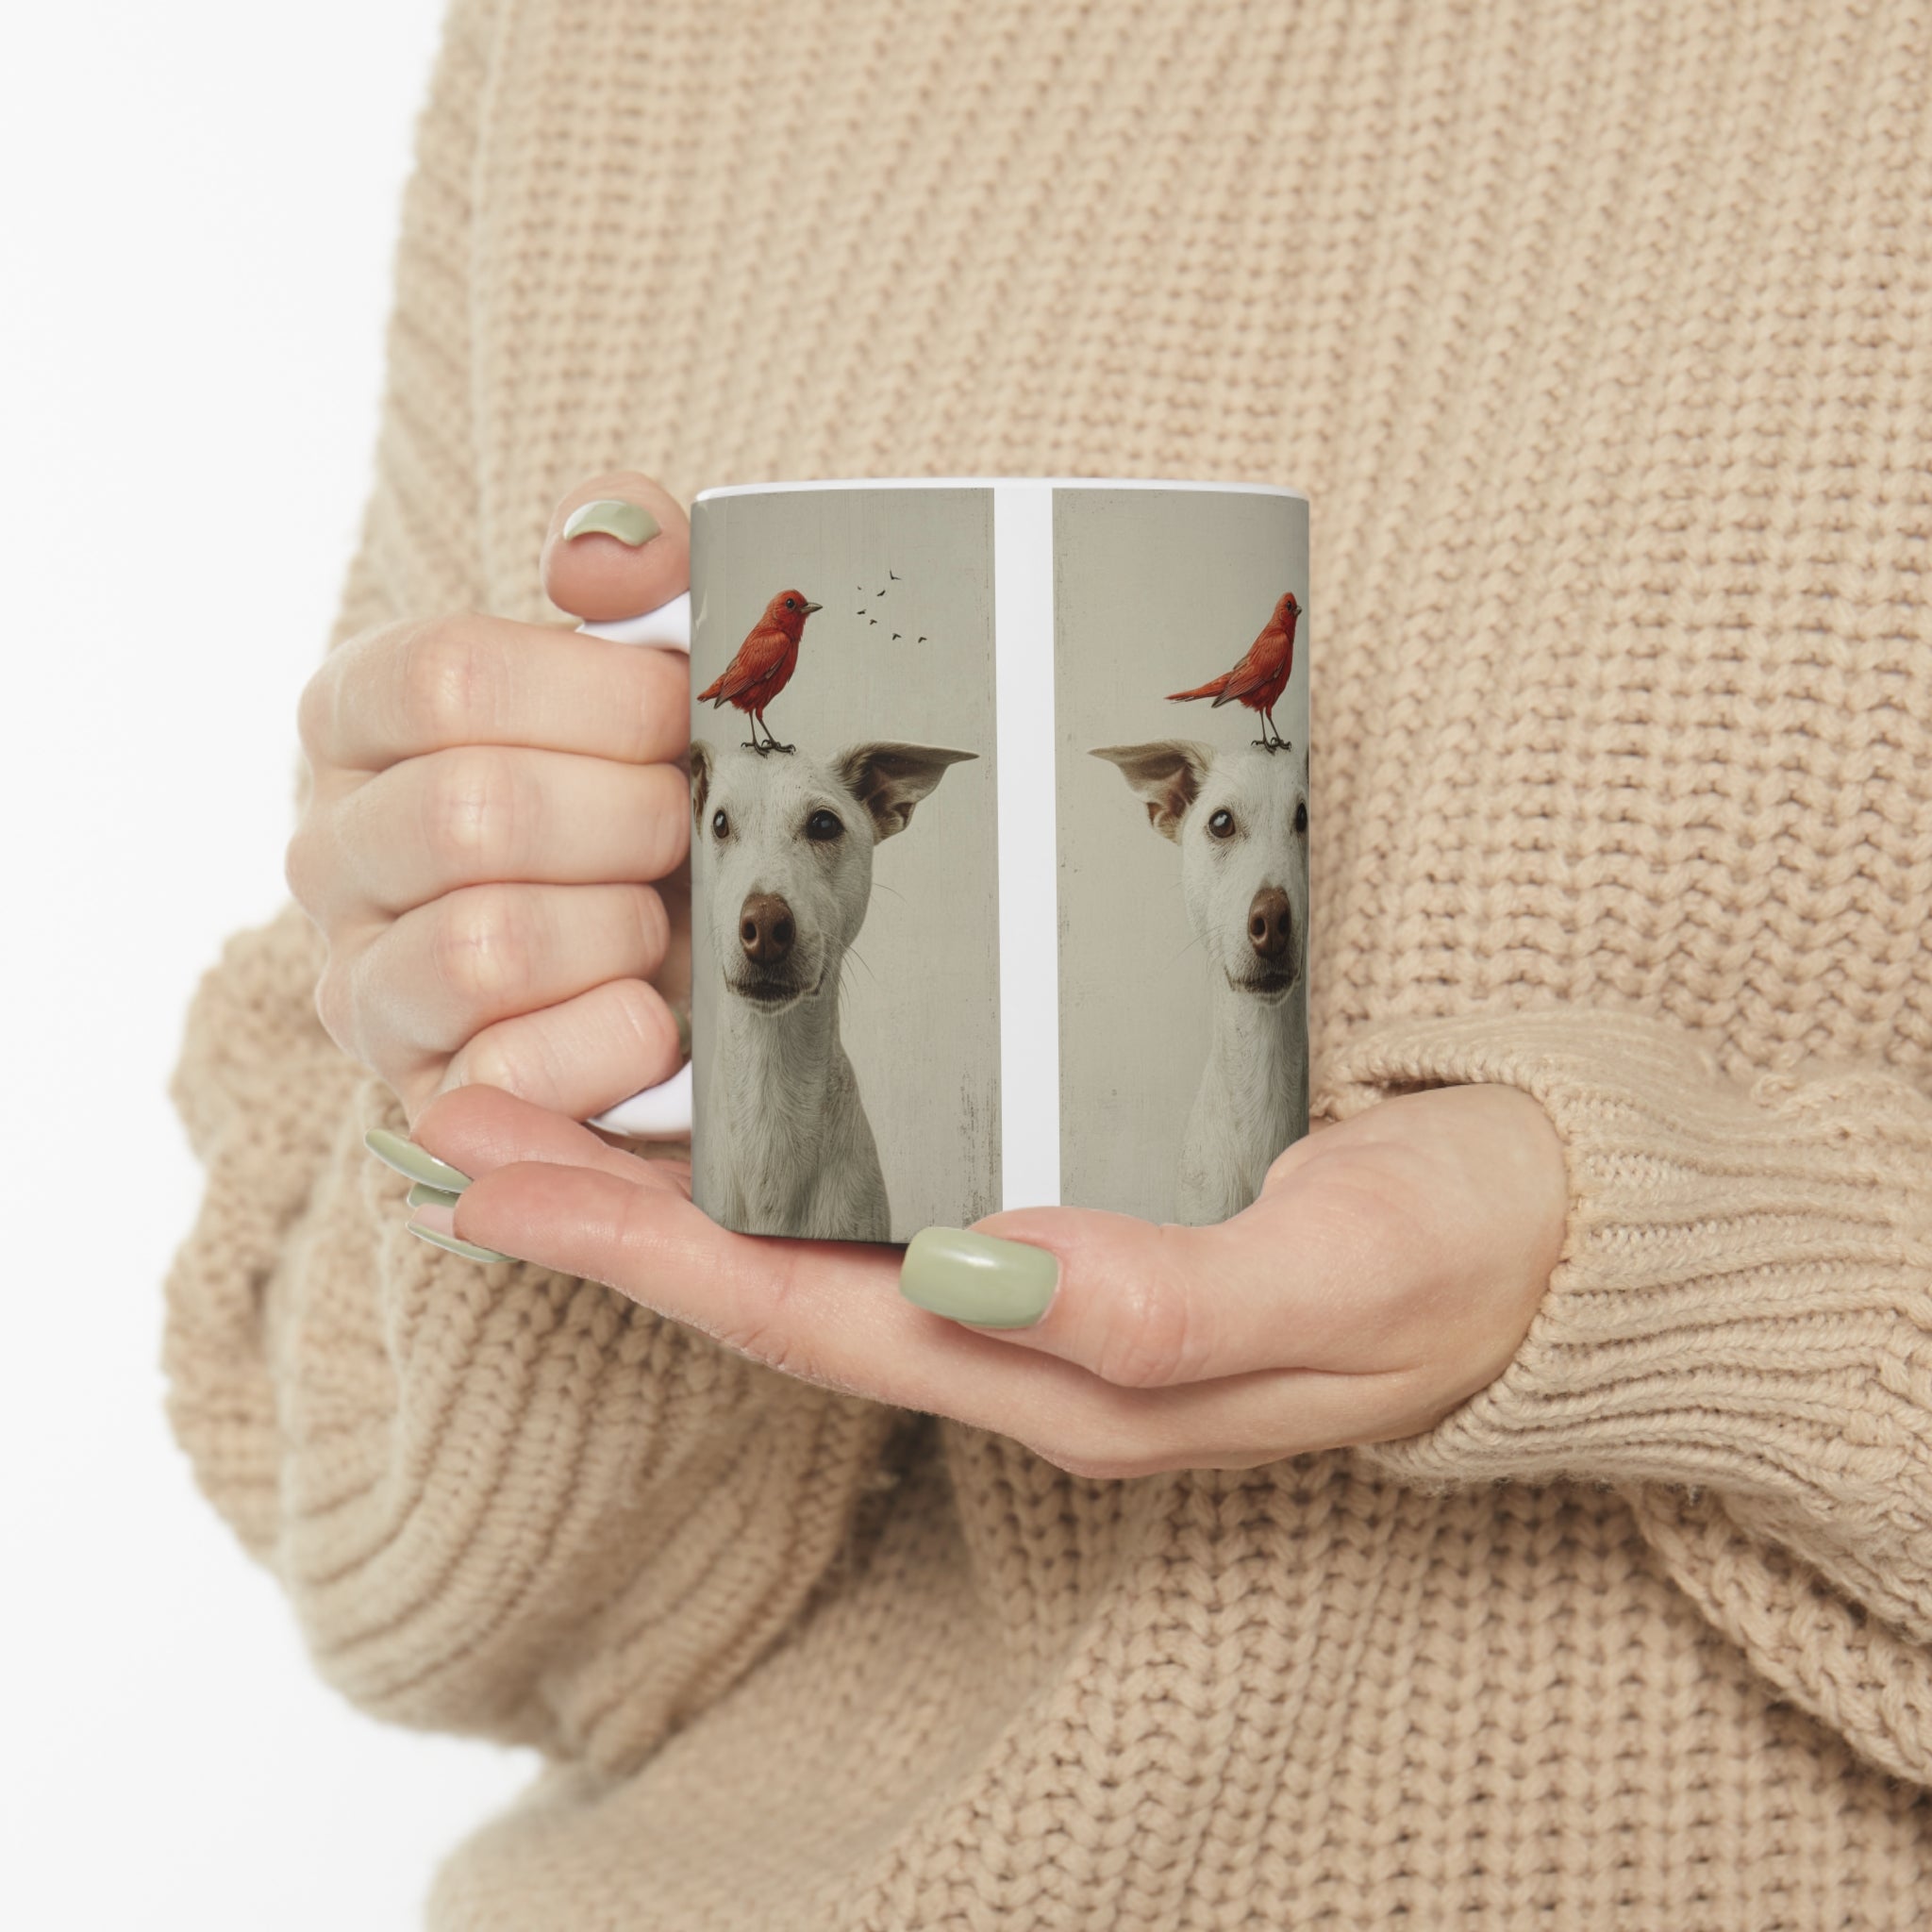 Hot Item! Combo Set  2024 Gratitude Journal and Happy Dog with Friendly Birddie Ceramic Mug 11oz - Adorable Animal Friendship Coffee Cup for Relaxing Mornings and Tea Time Bliss